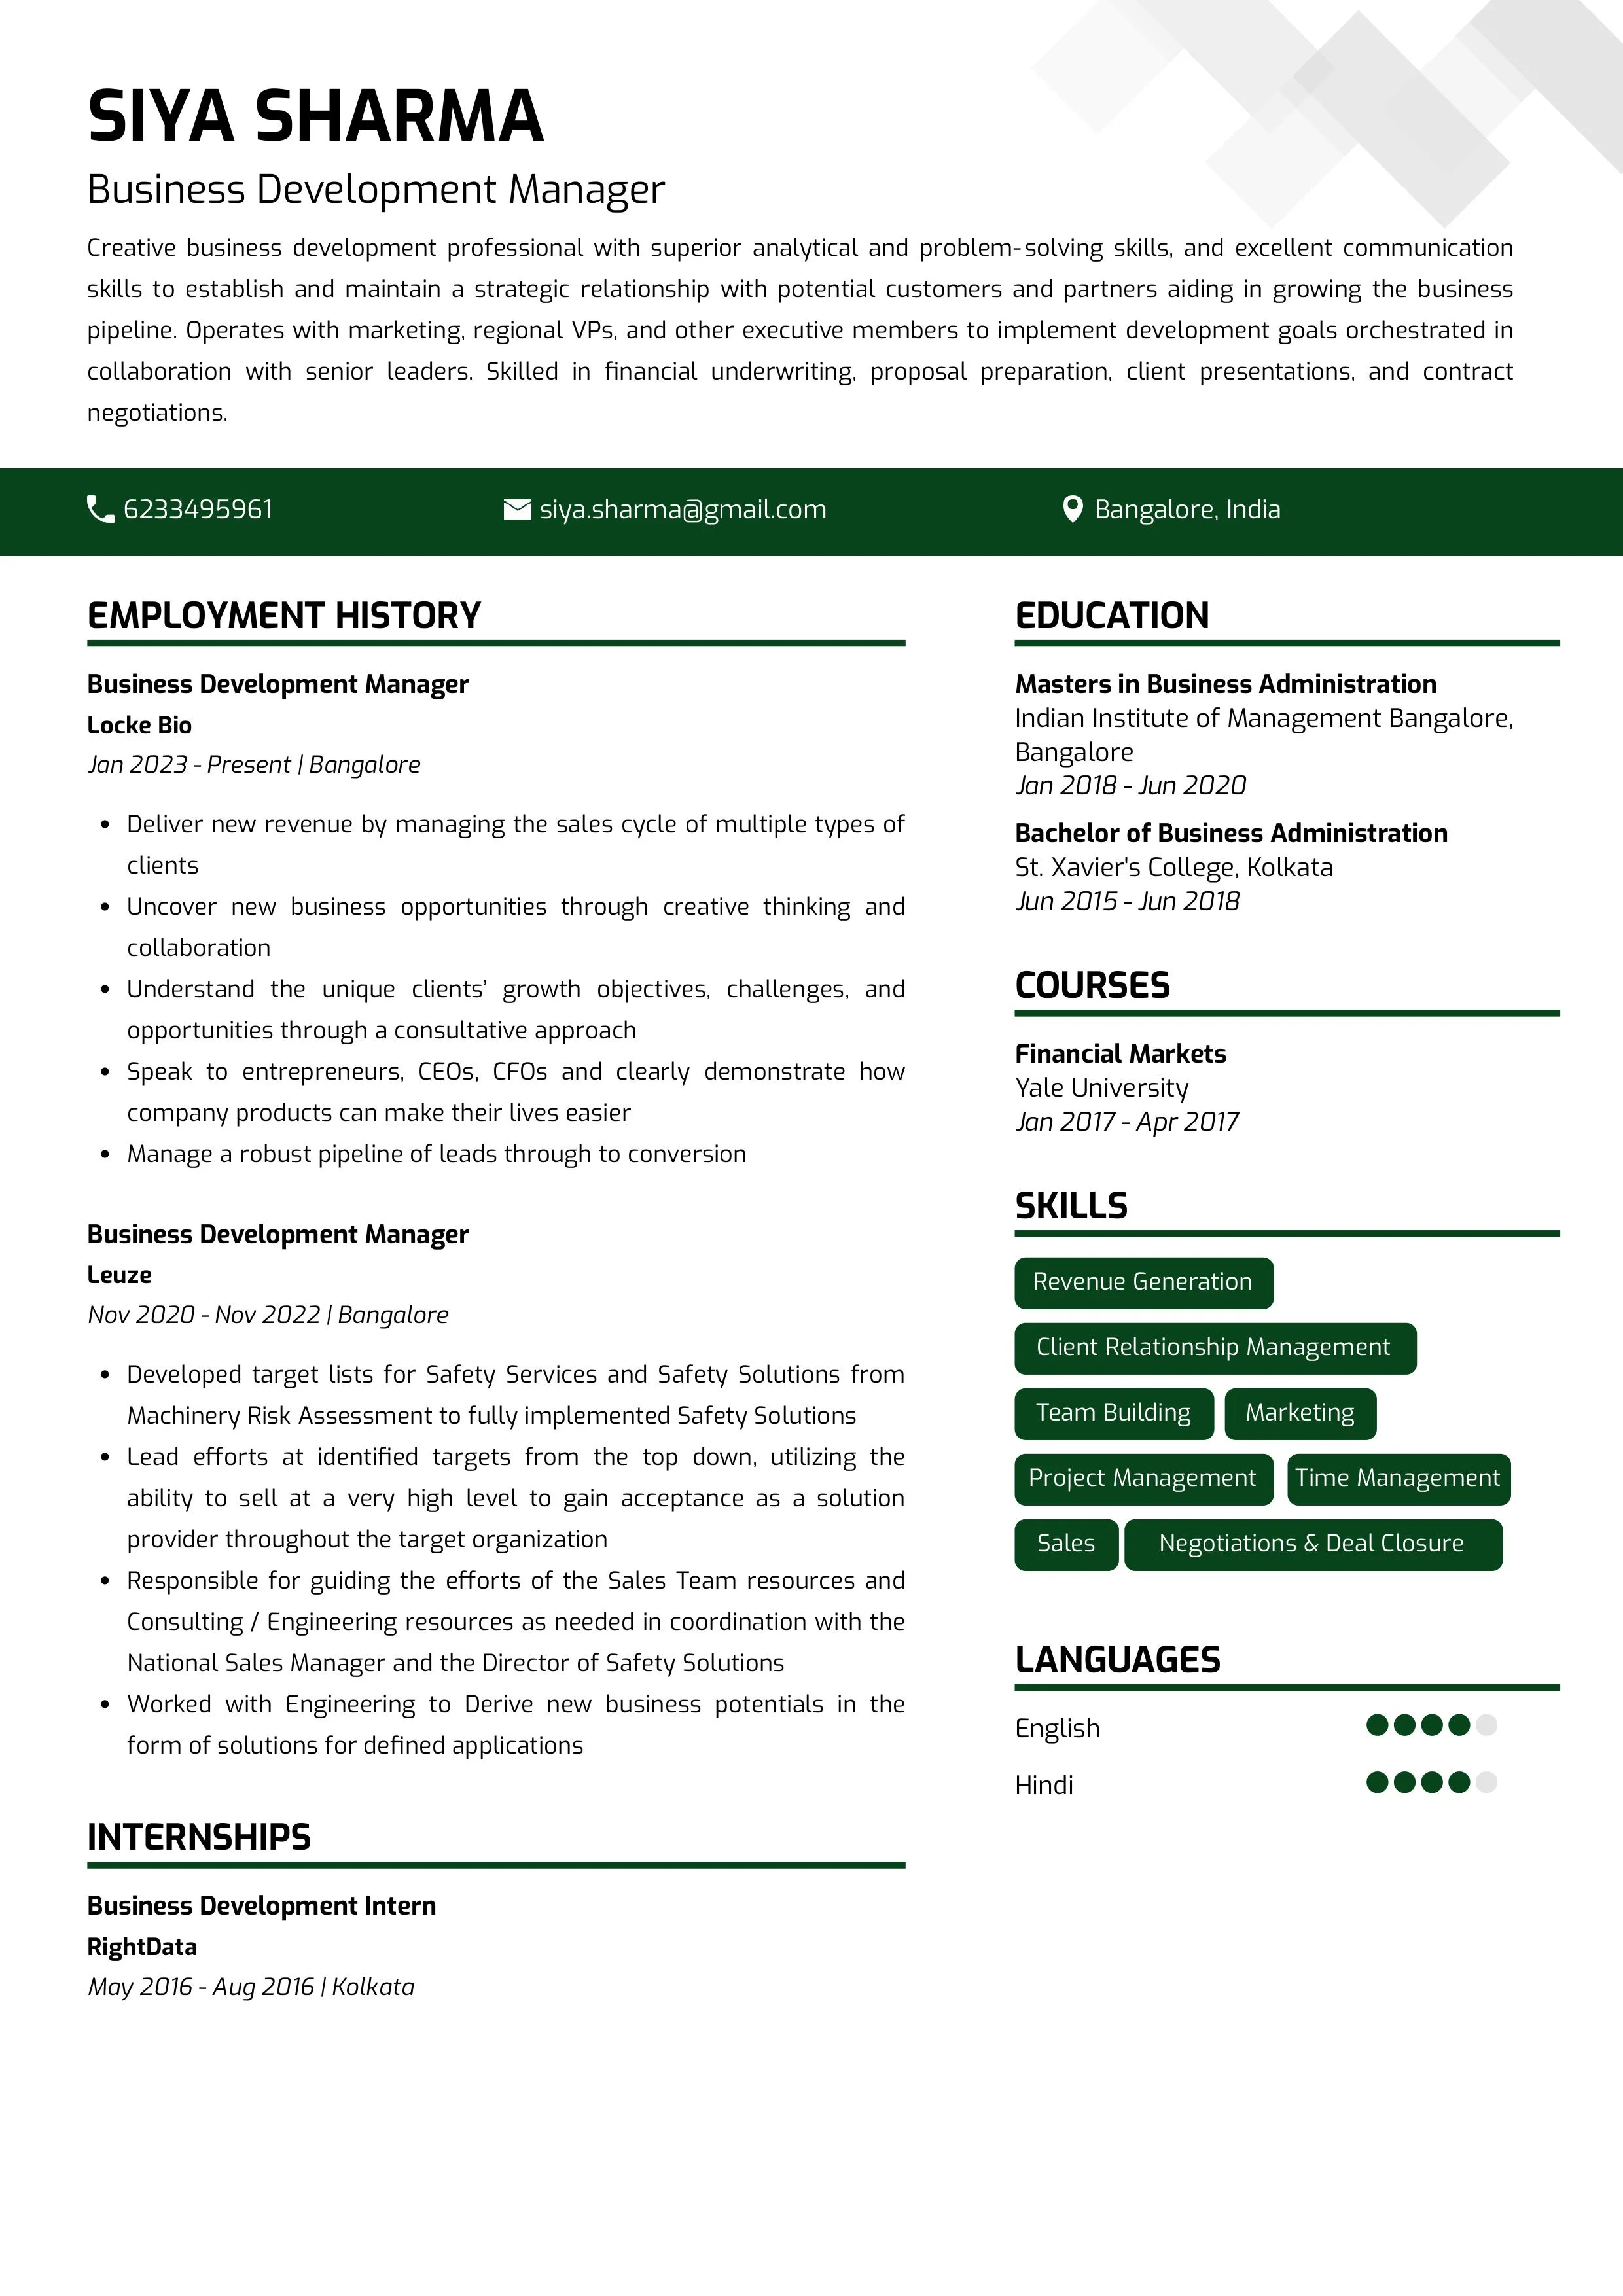 Sample Resume of Business Development Manager | Free Resume Templates & Samples on Resumod.co